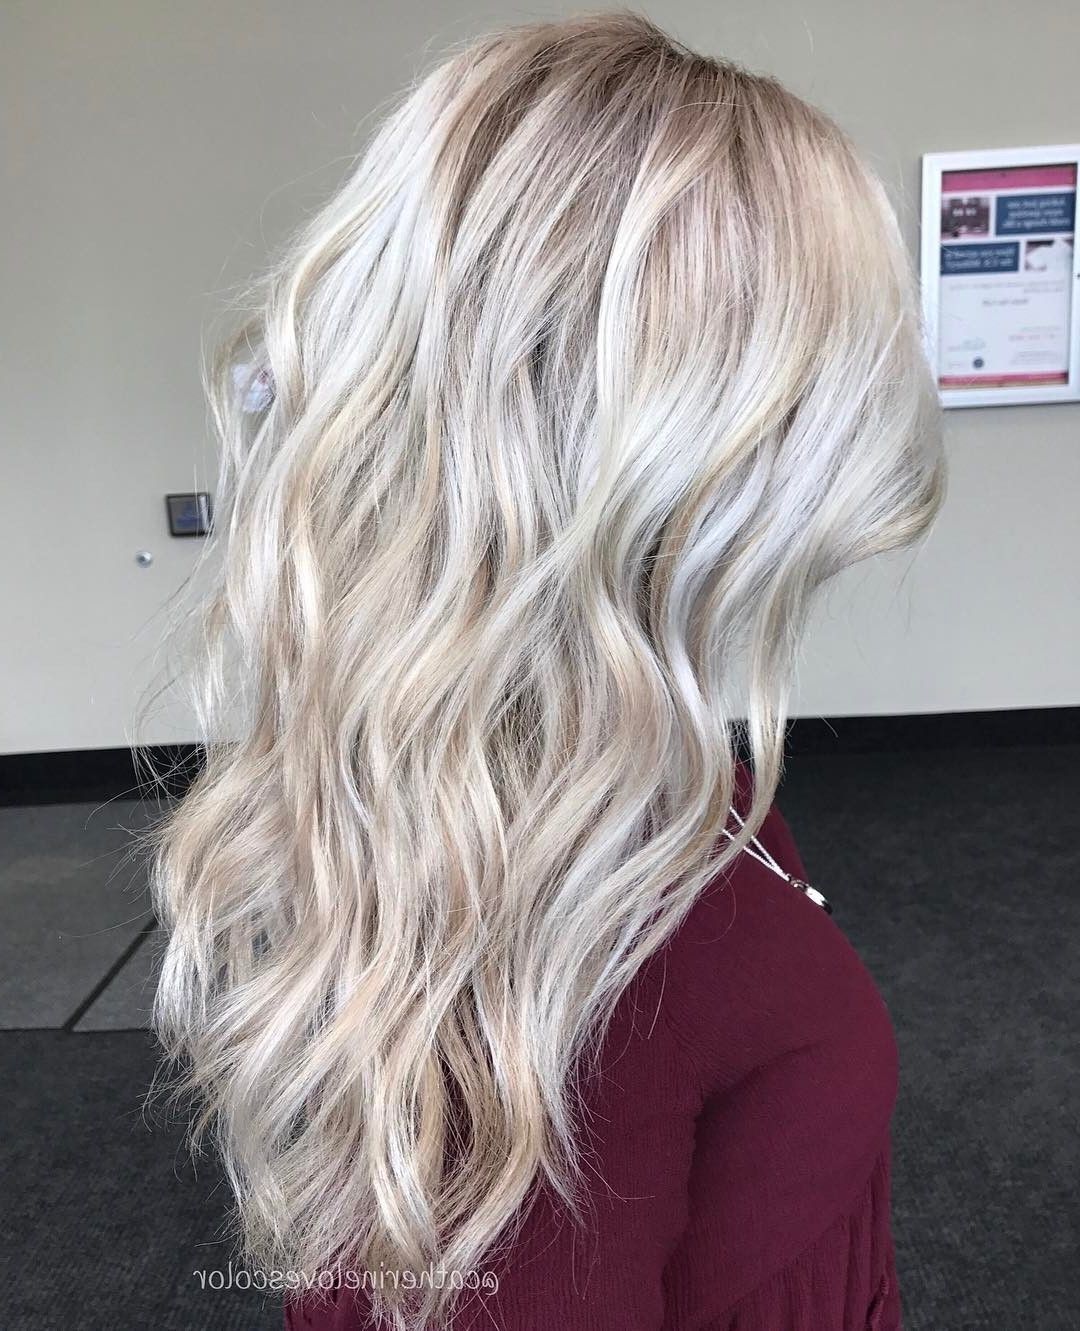 Latest Dark Blonde Into White Hairstyles With 20 Adorable Ash Blonde Hairstyles To Try: Hair Color Ideas  (View 4 of 20)